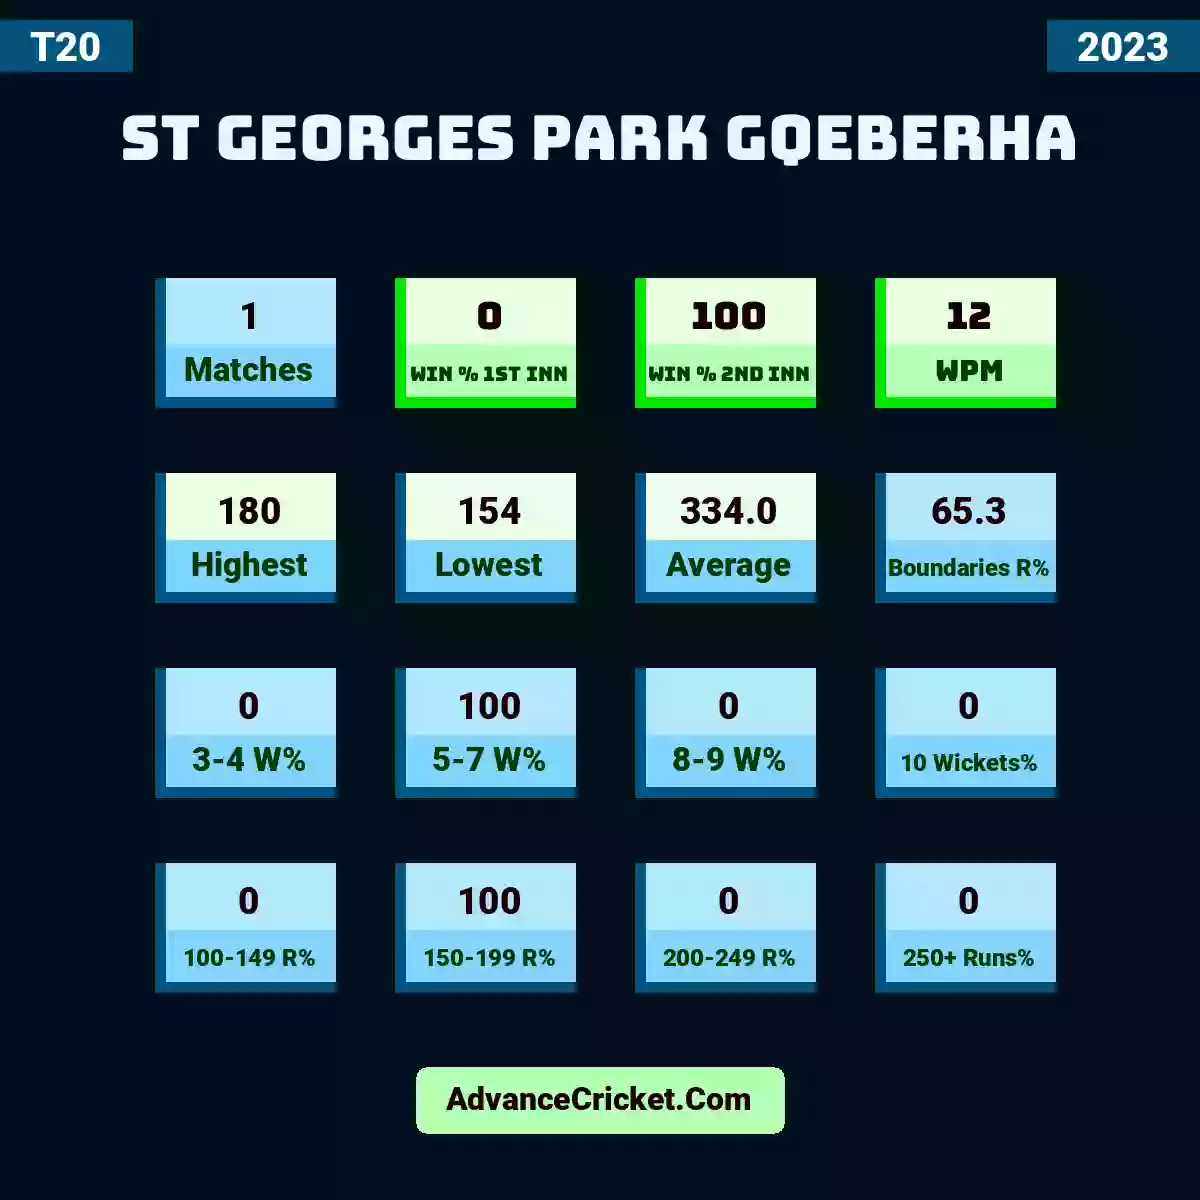 Image showing St Georges Park Gqeberha with Matches: 1, Win % 1st Inn: 0, Win % 2nd Inn: 100, WPM: 12, Highest: 180, Lowest: 154, Average: 334.0, Boundaries R%: 65.3, 3-4 W%: 0, 5-7 W%: 100, 8-9 W%: 0, 10 Wickets%: 0, 100-149 R%: 0, 150-199 R%: 100, 200-249 R%: 0, 250+ Runs%: 0.